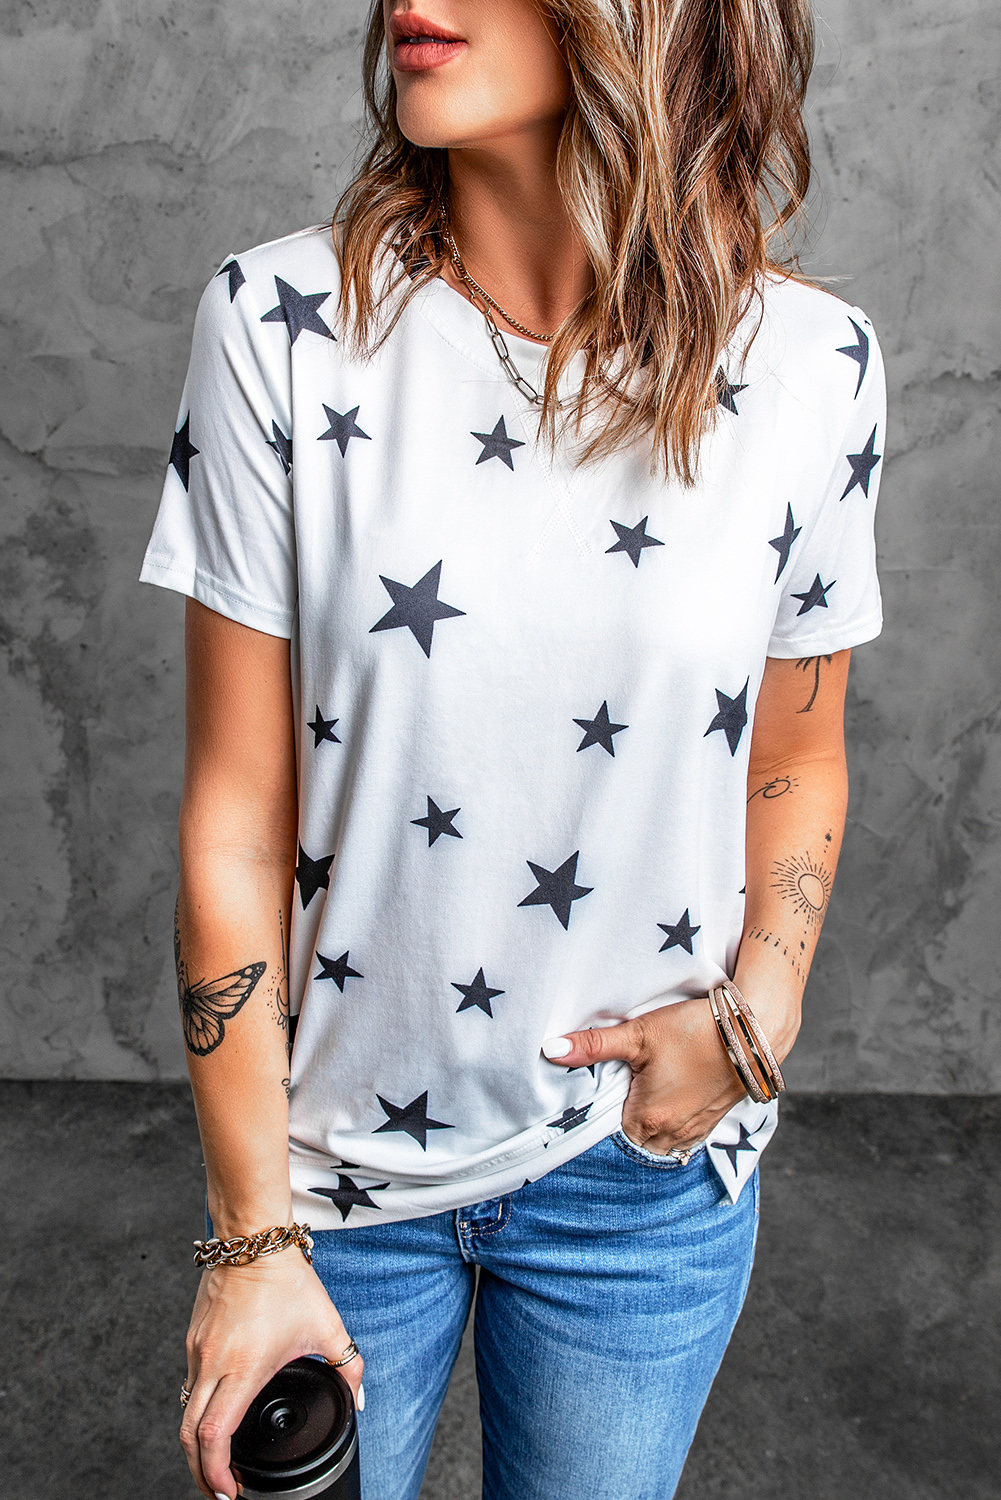 Shewin Wholesale Dropshipping White Star Print Short Sleeve Crew Neck T-SHIRT for Women